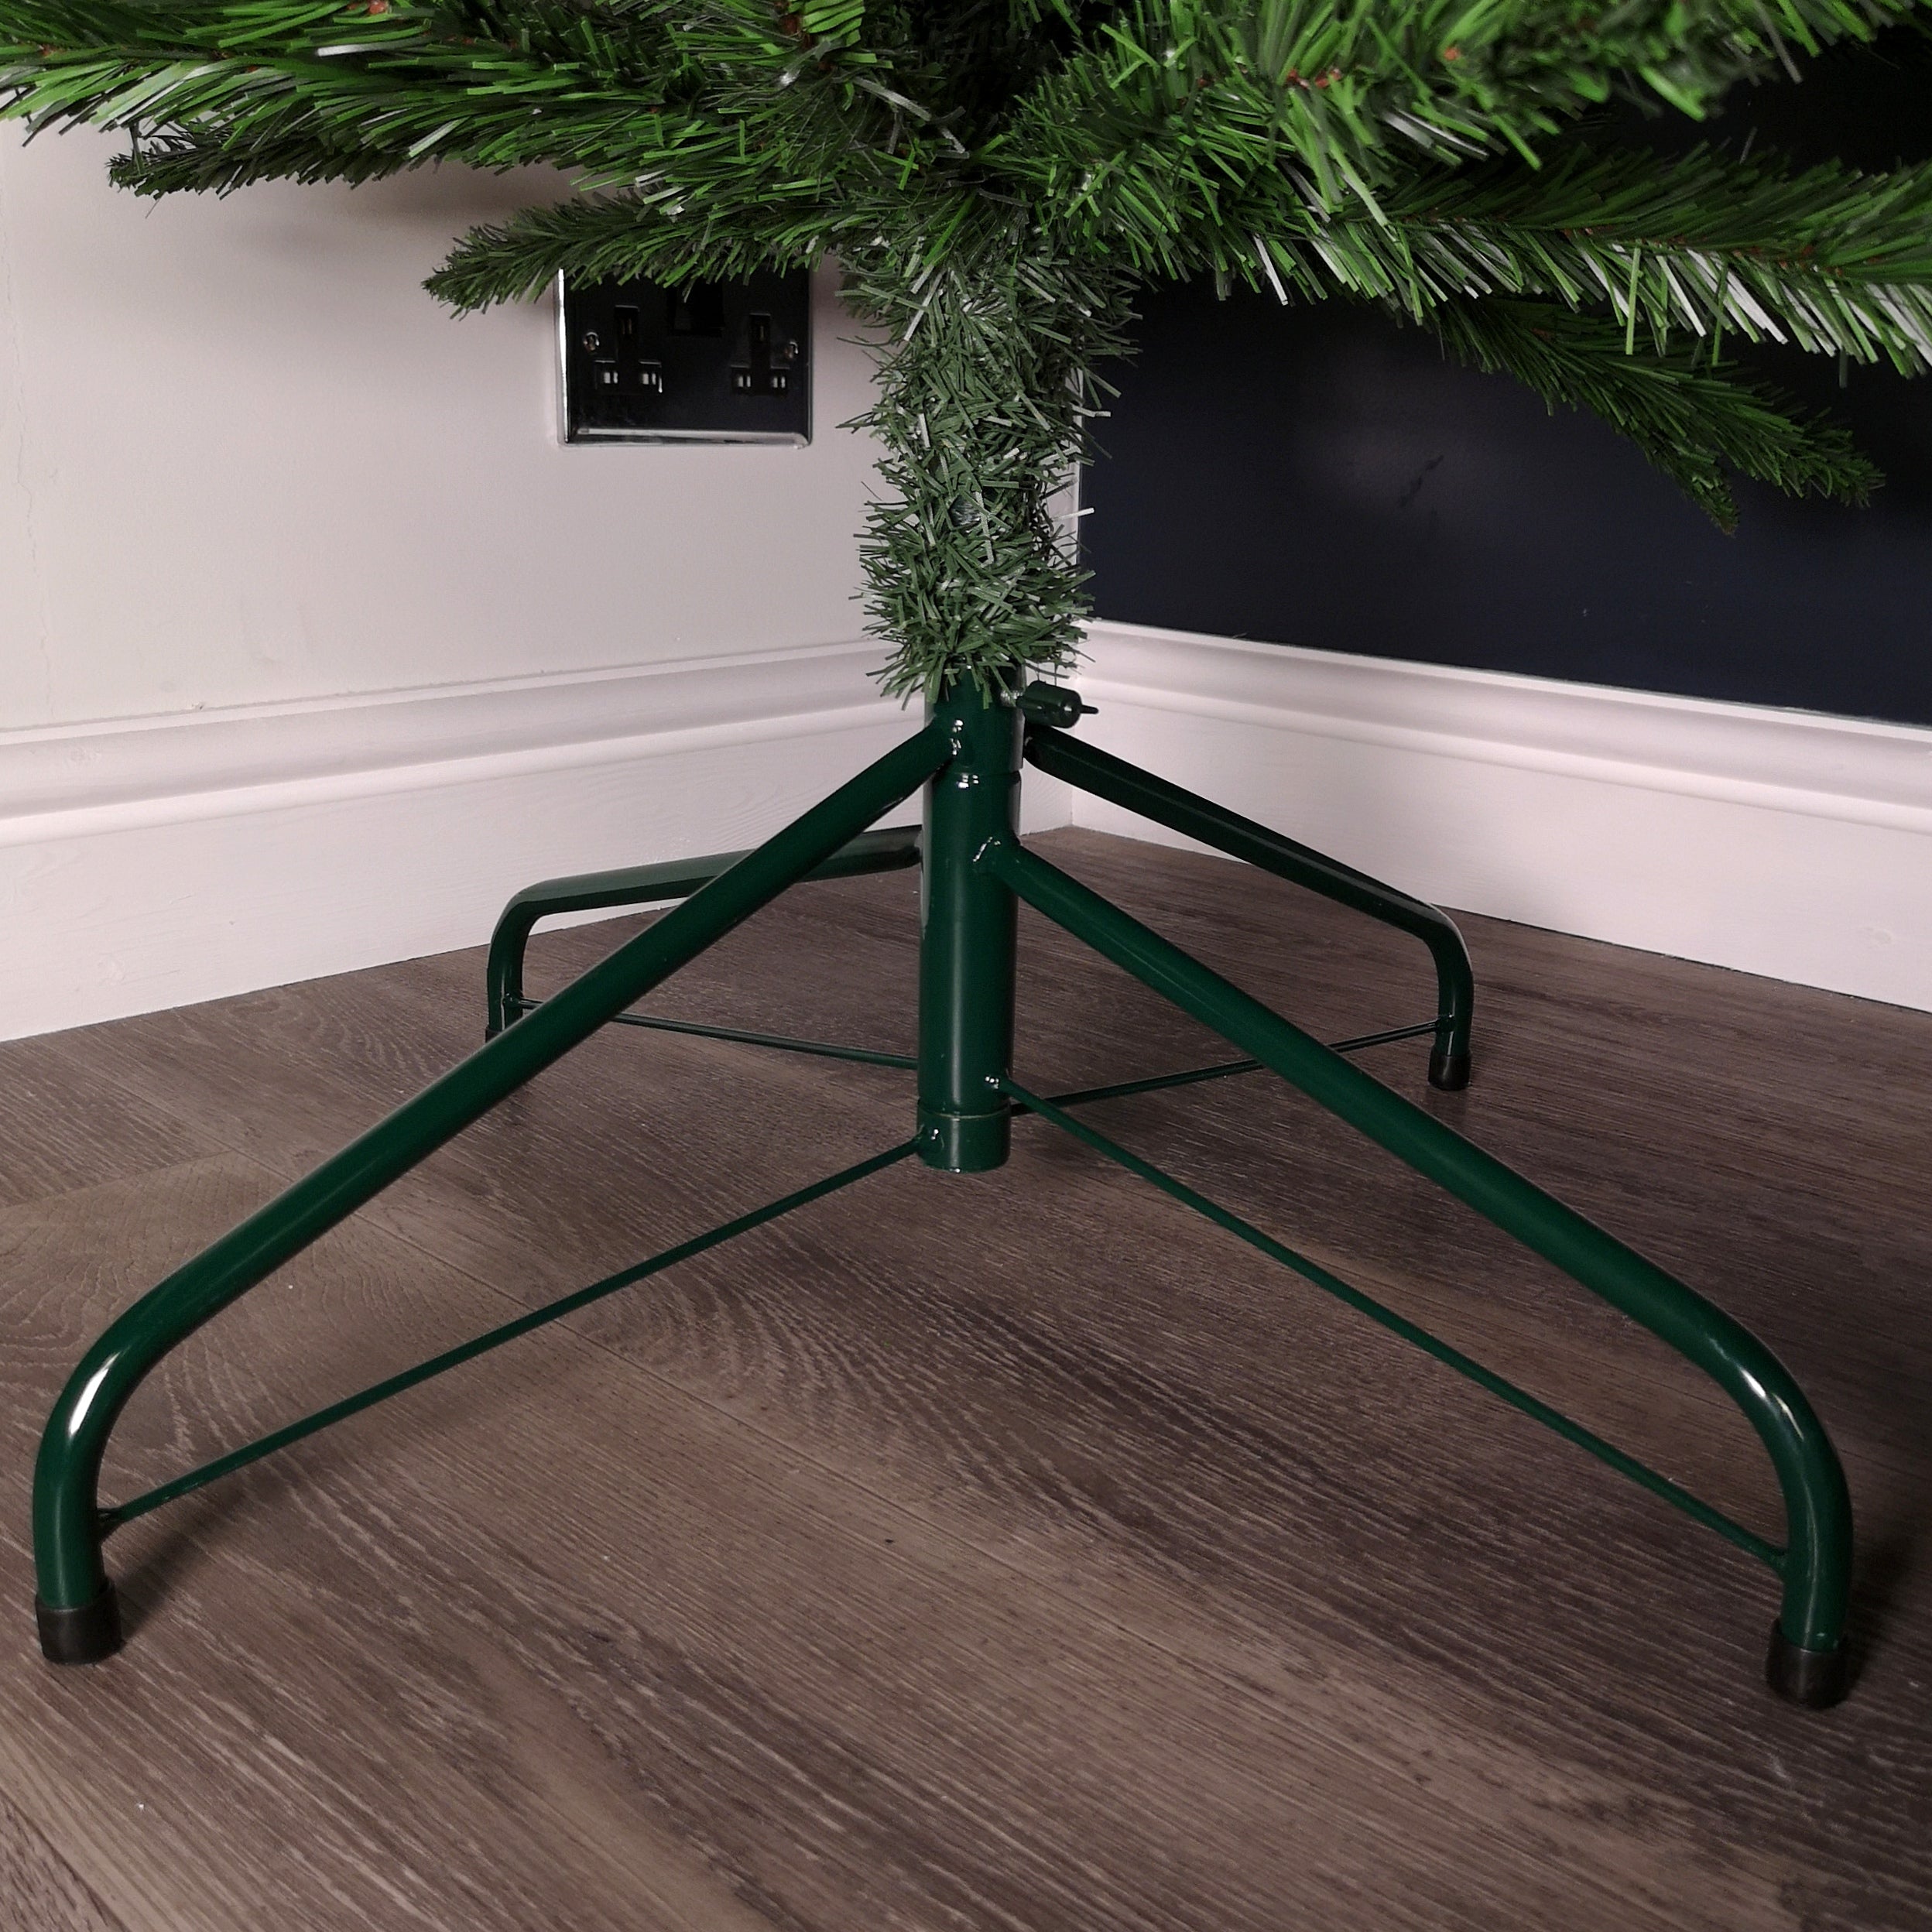 8ft (2.4m) Pencil Style Slim Artificial Christmas Tree in Plain Green